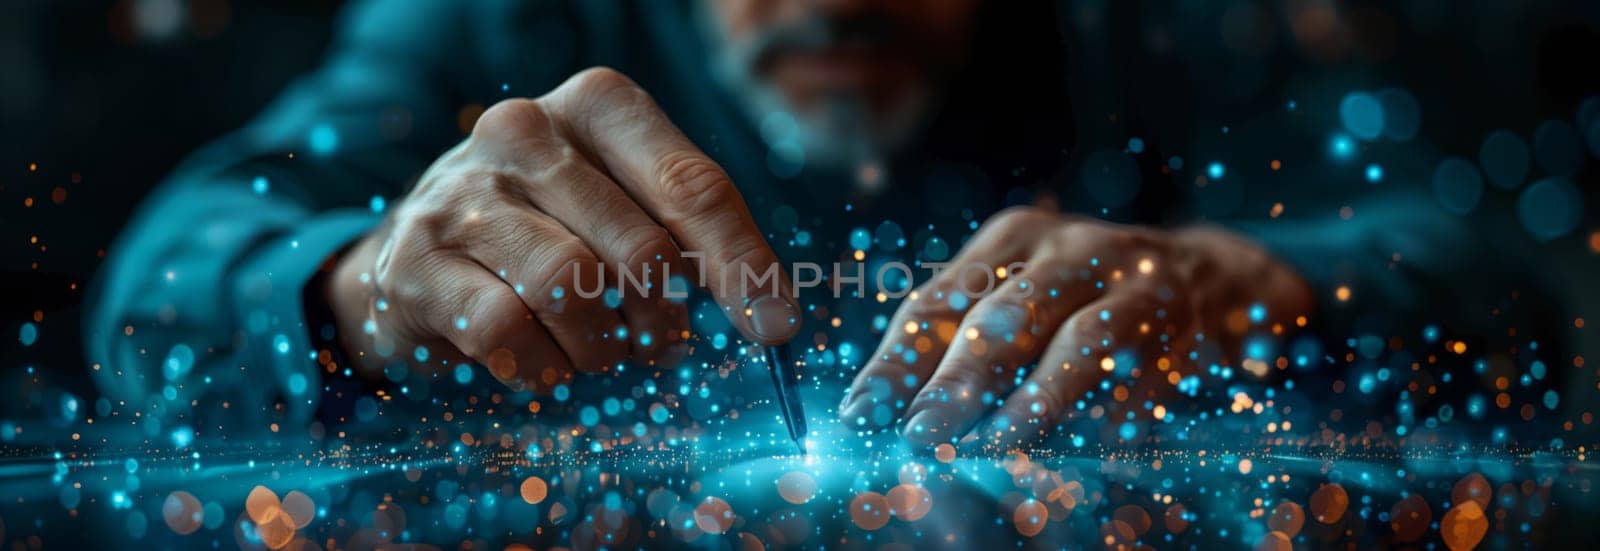 A close up photo capturing a mans hands typing on a computer keyboard, with electric blue LEDlit keys creating a mesmerizing pattern in the darkness